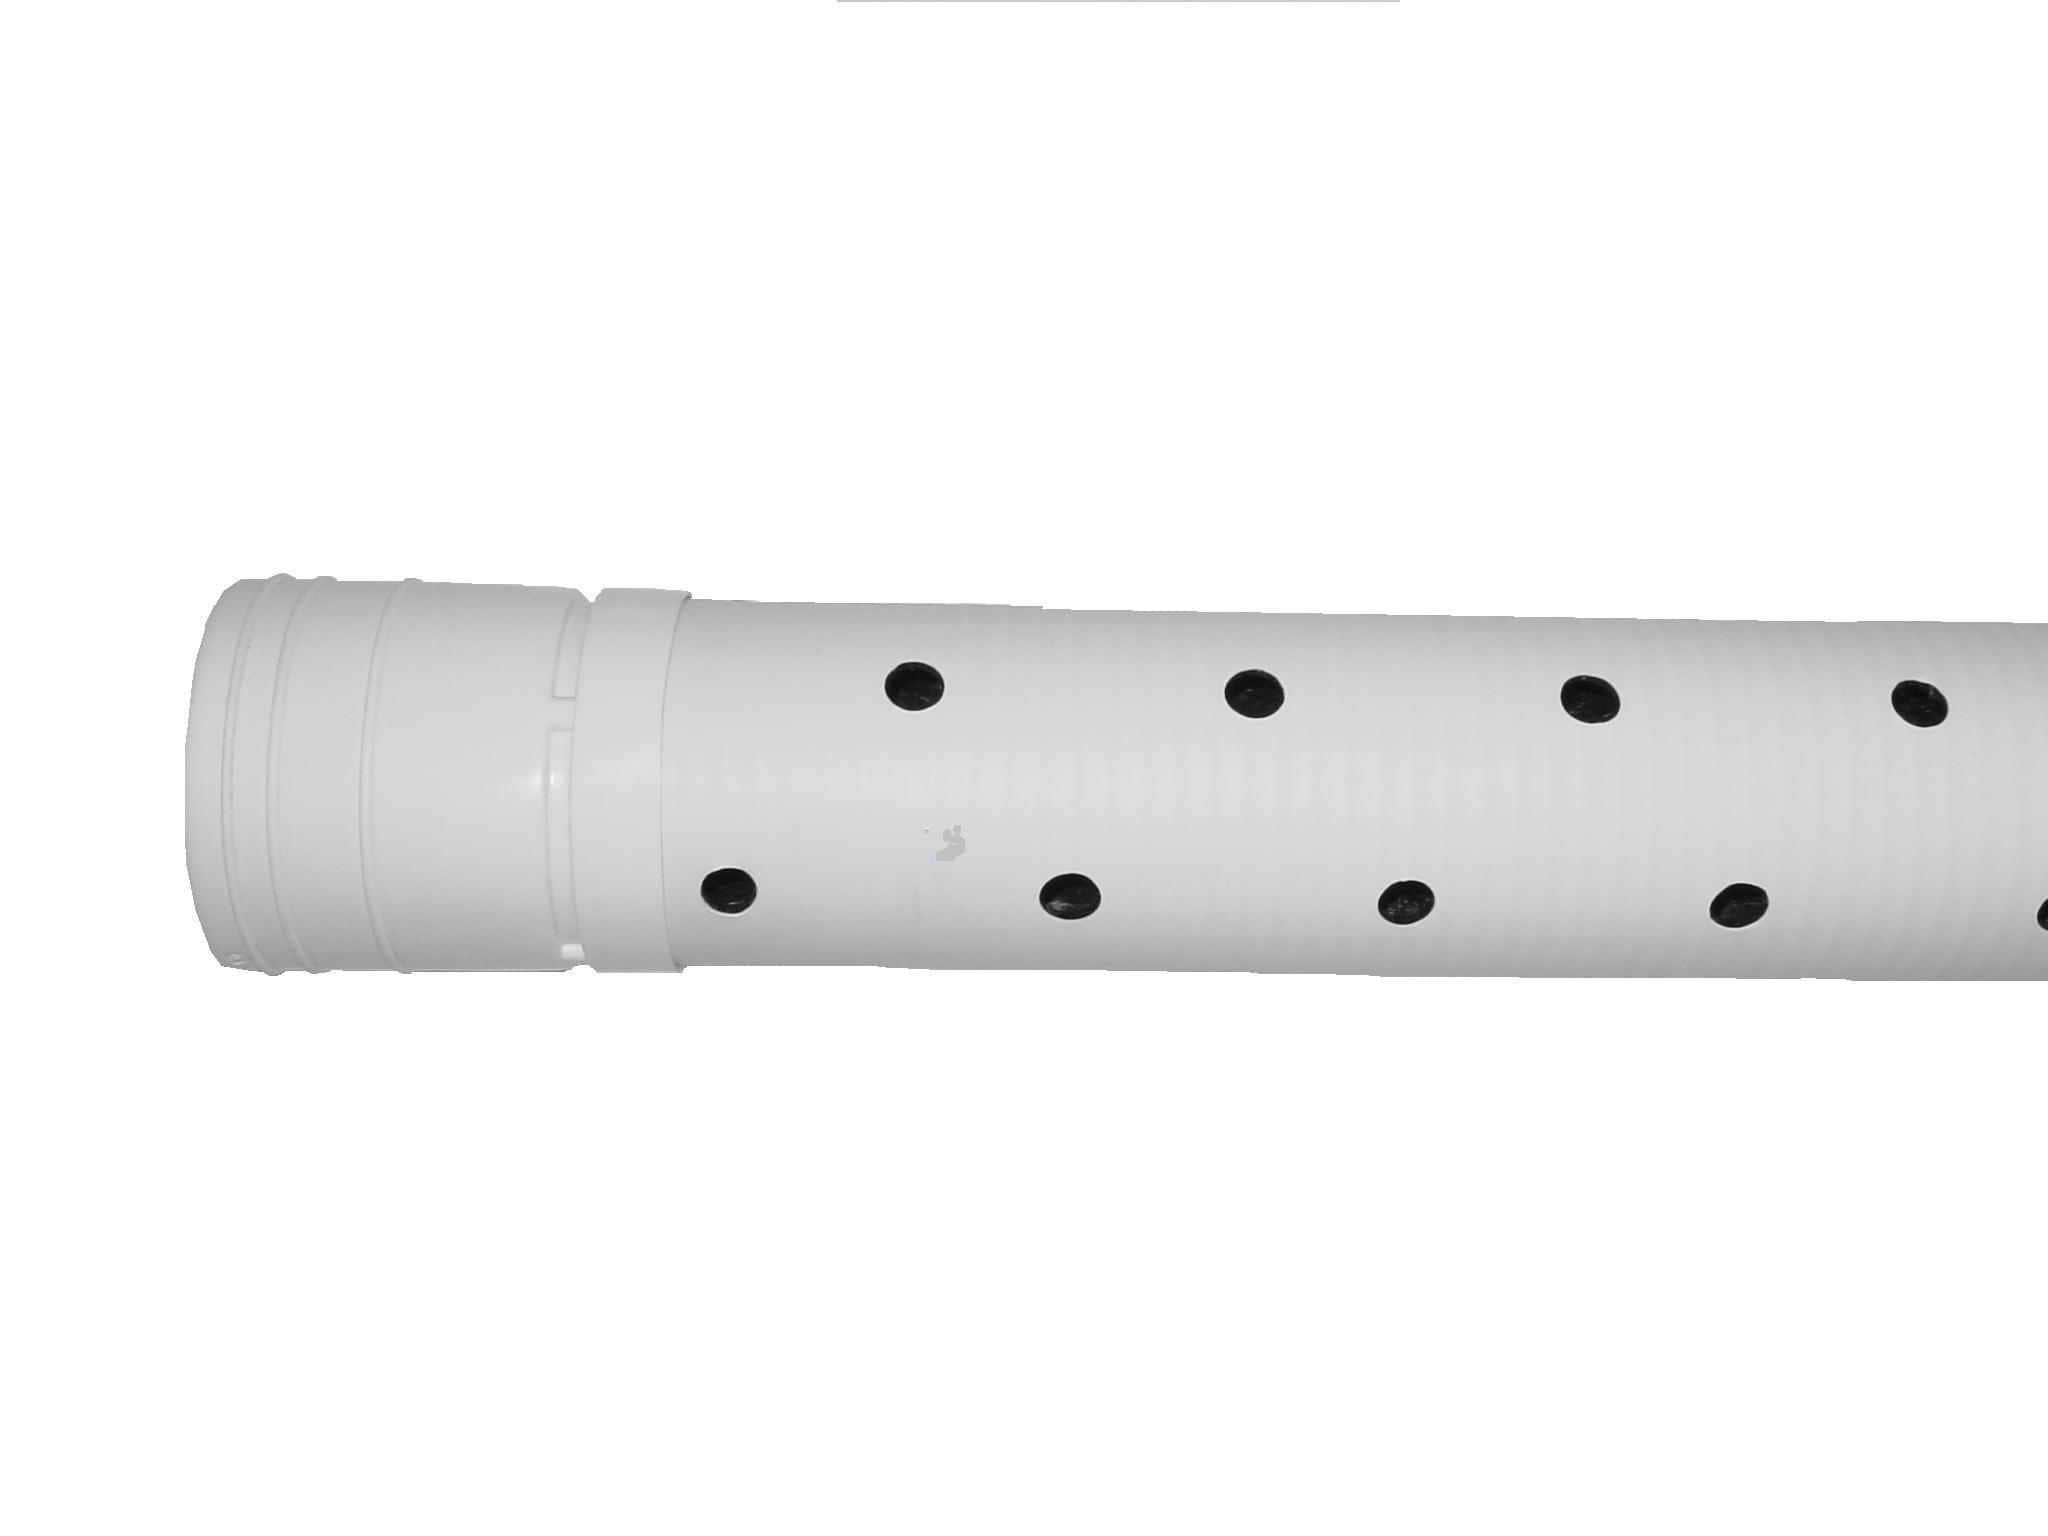 2 Inch Perforated Drain Pipe With Sock - www.inf-inet.com